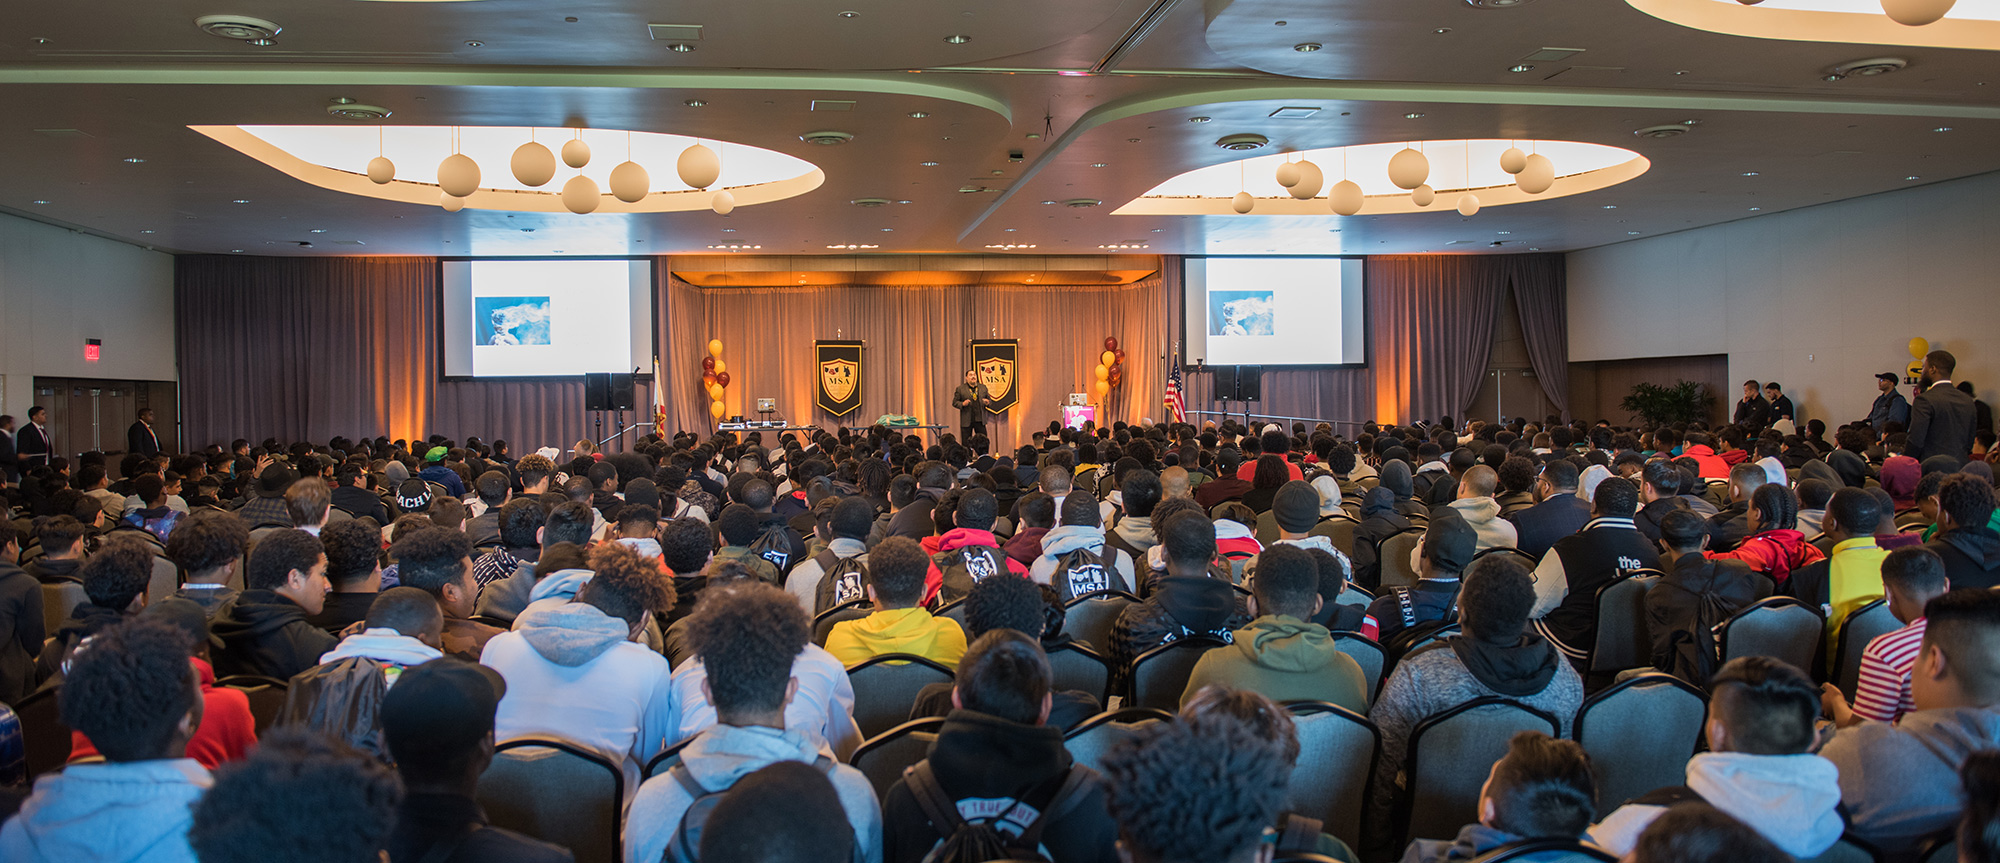 Nearly 900 students from local schools attended the MSA 2019 Spring Summit